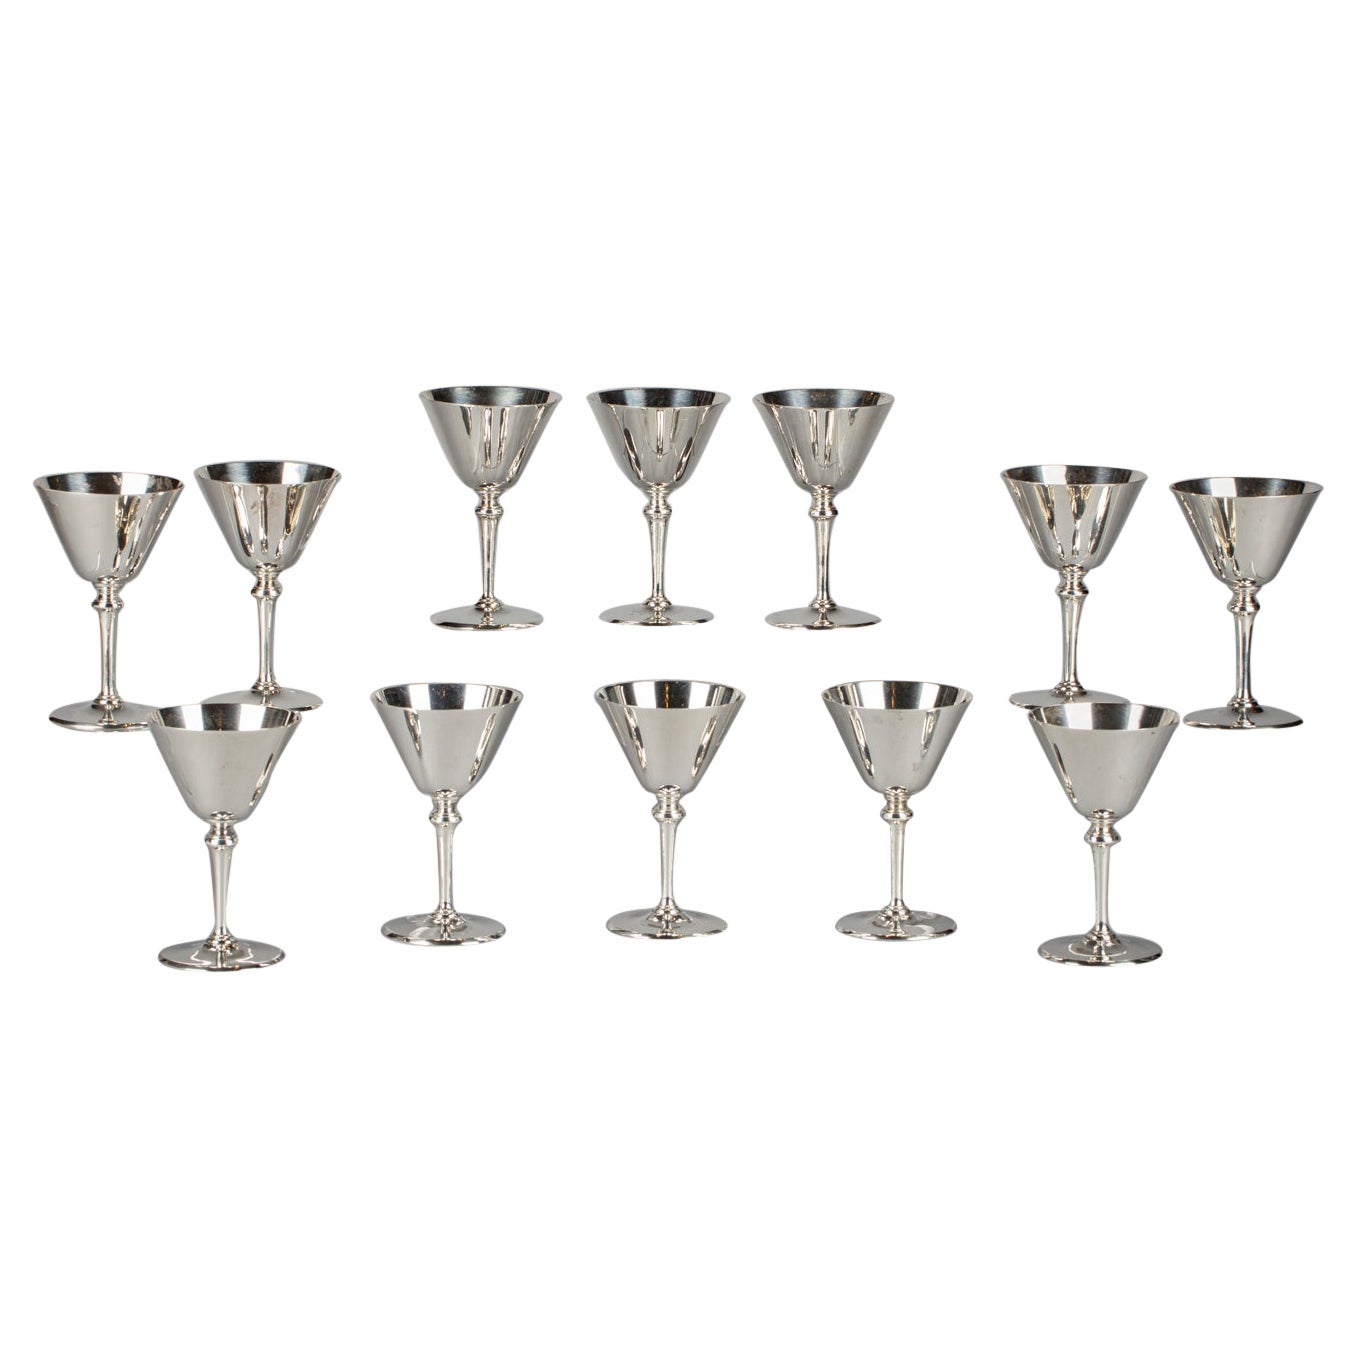 Set of 12 Tiffany Silver Wine Goblet, 1907-1947 For Sale